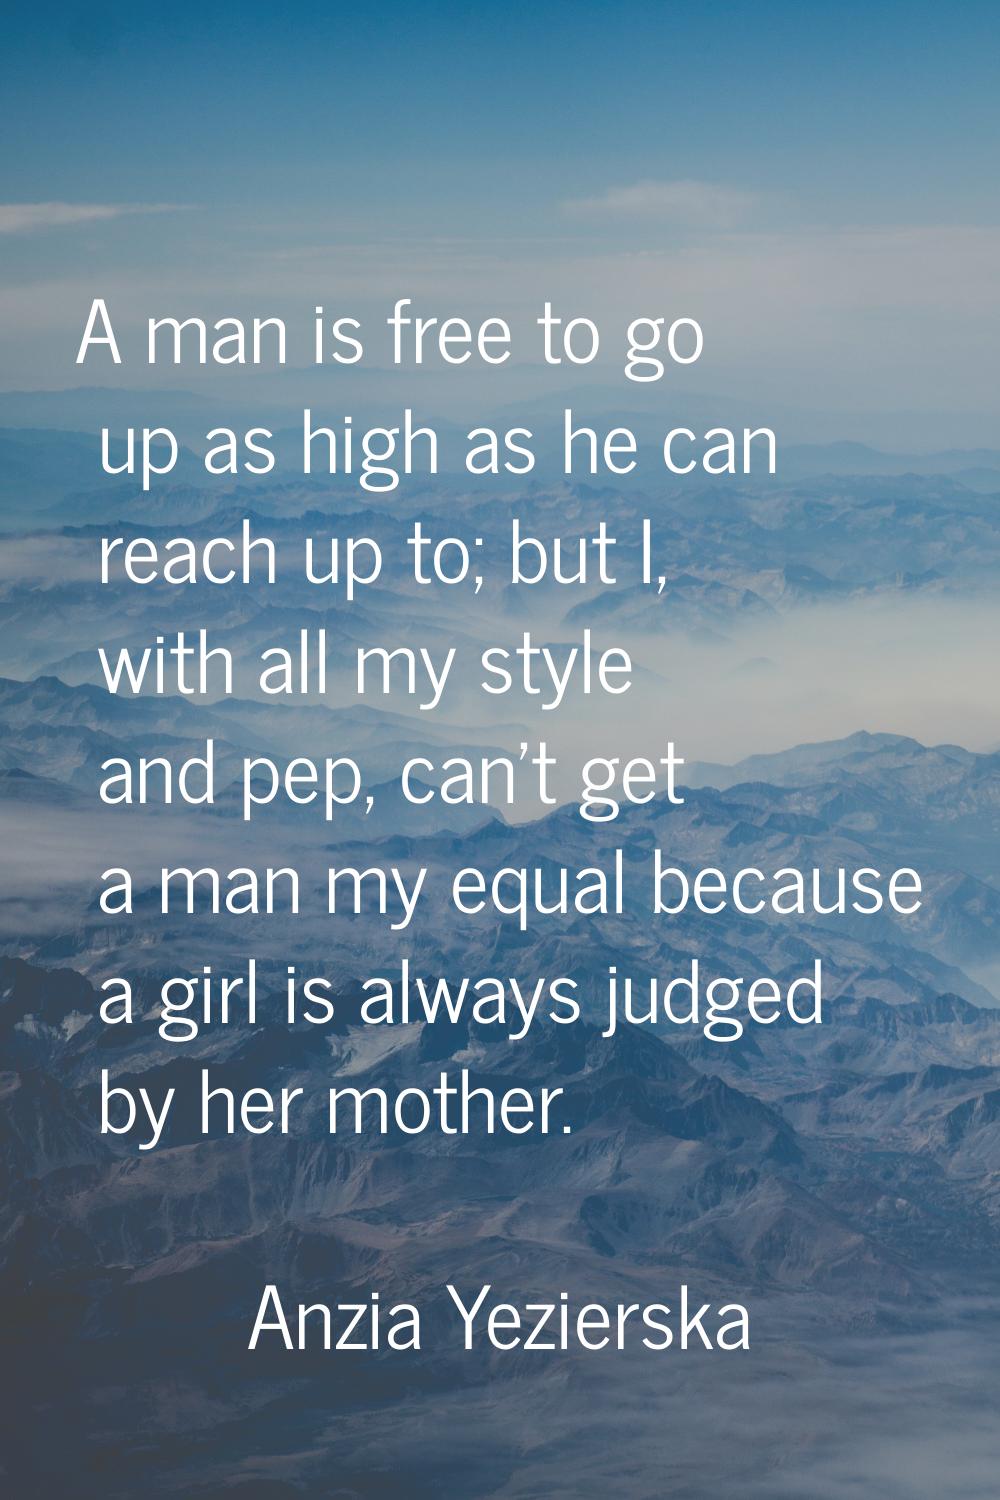 A man is free to go up as high as he can reach up to; but I, with all my style and pep, can't get a